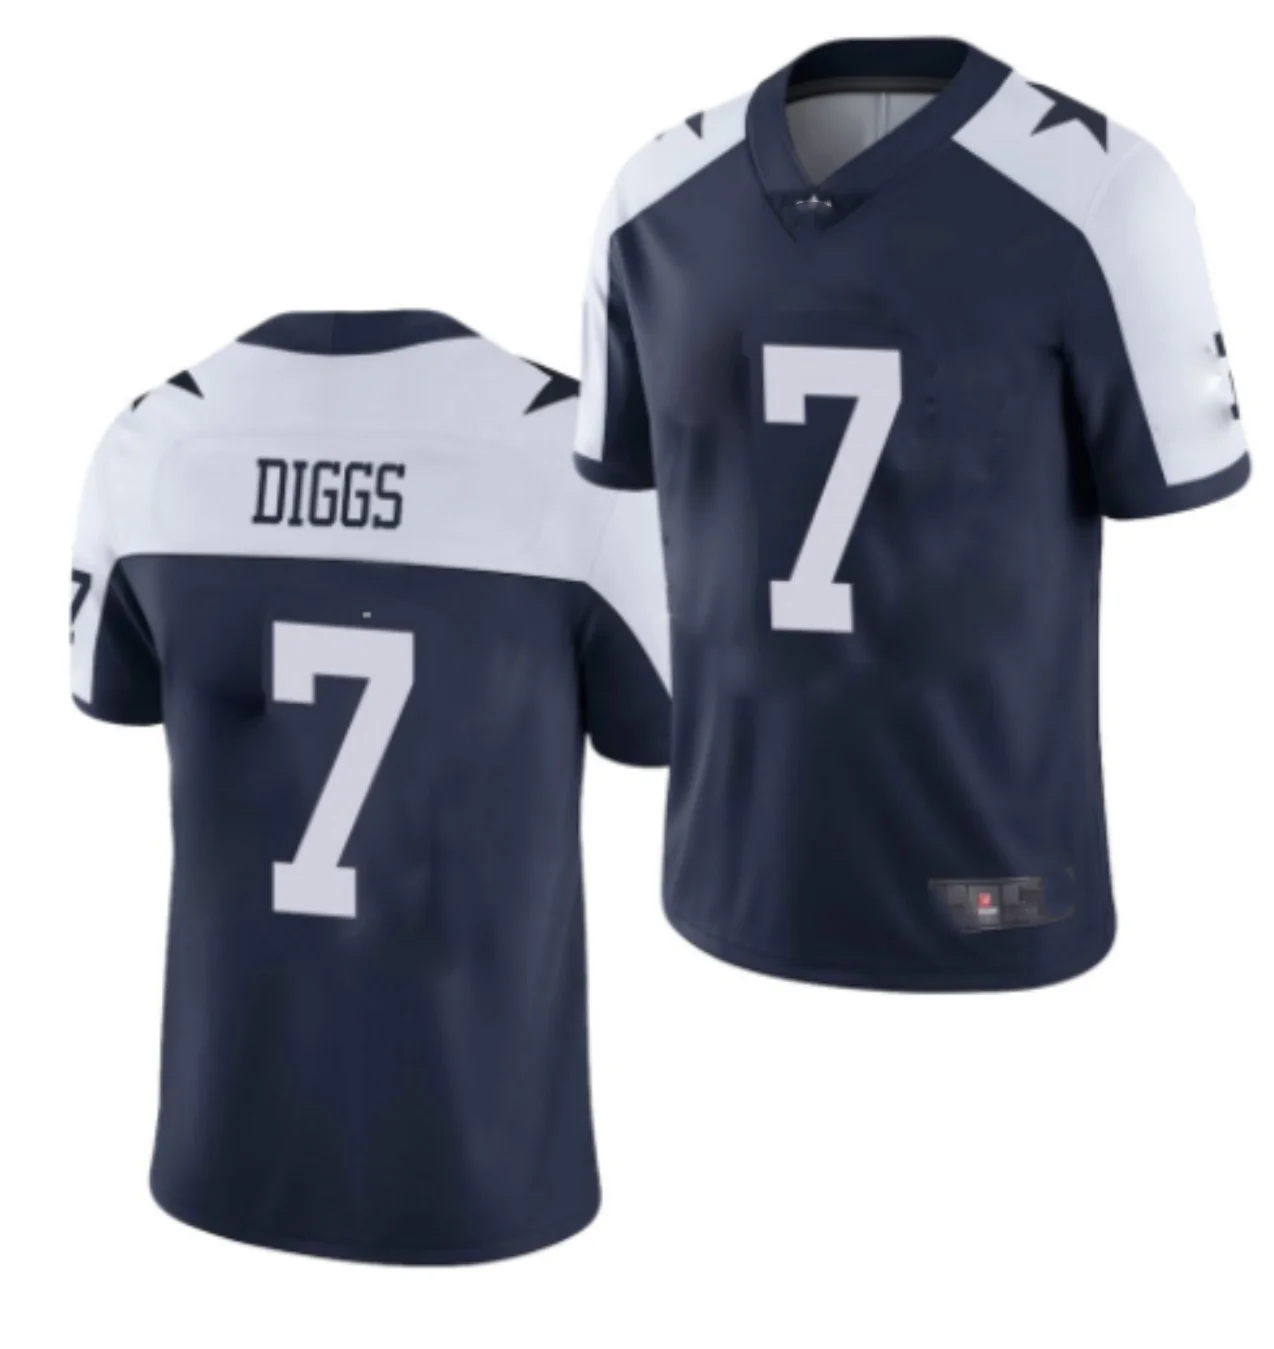 

New 2021 Vapor Limited Dallas Cowboy #7 Trevon Diggs American Football Jersey Top Embroidery Personal Custom for Any Name